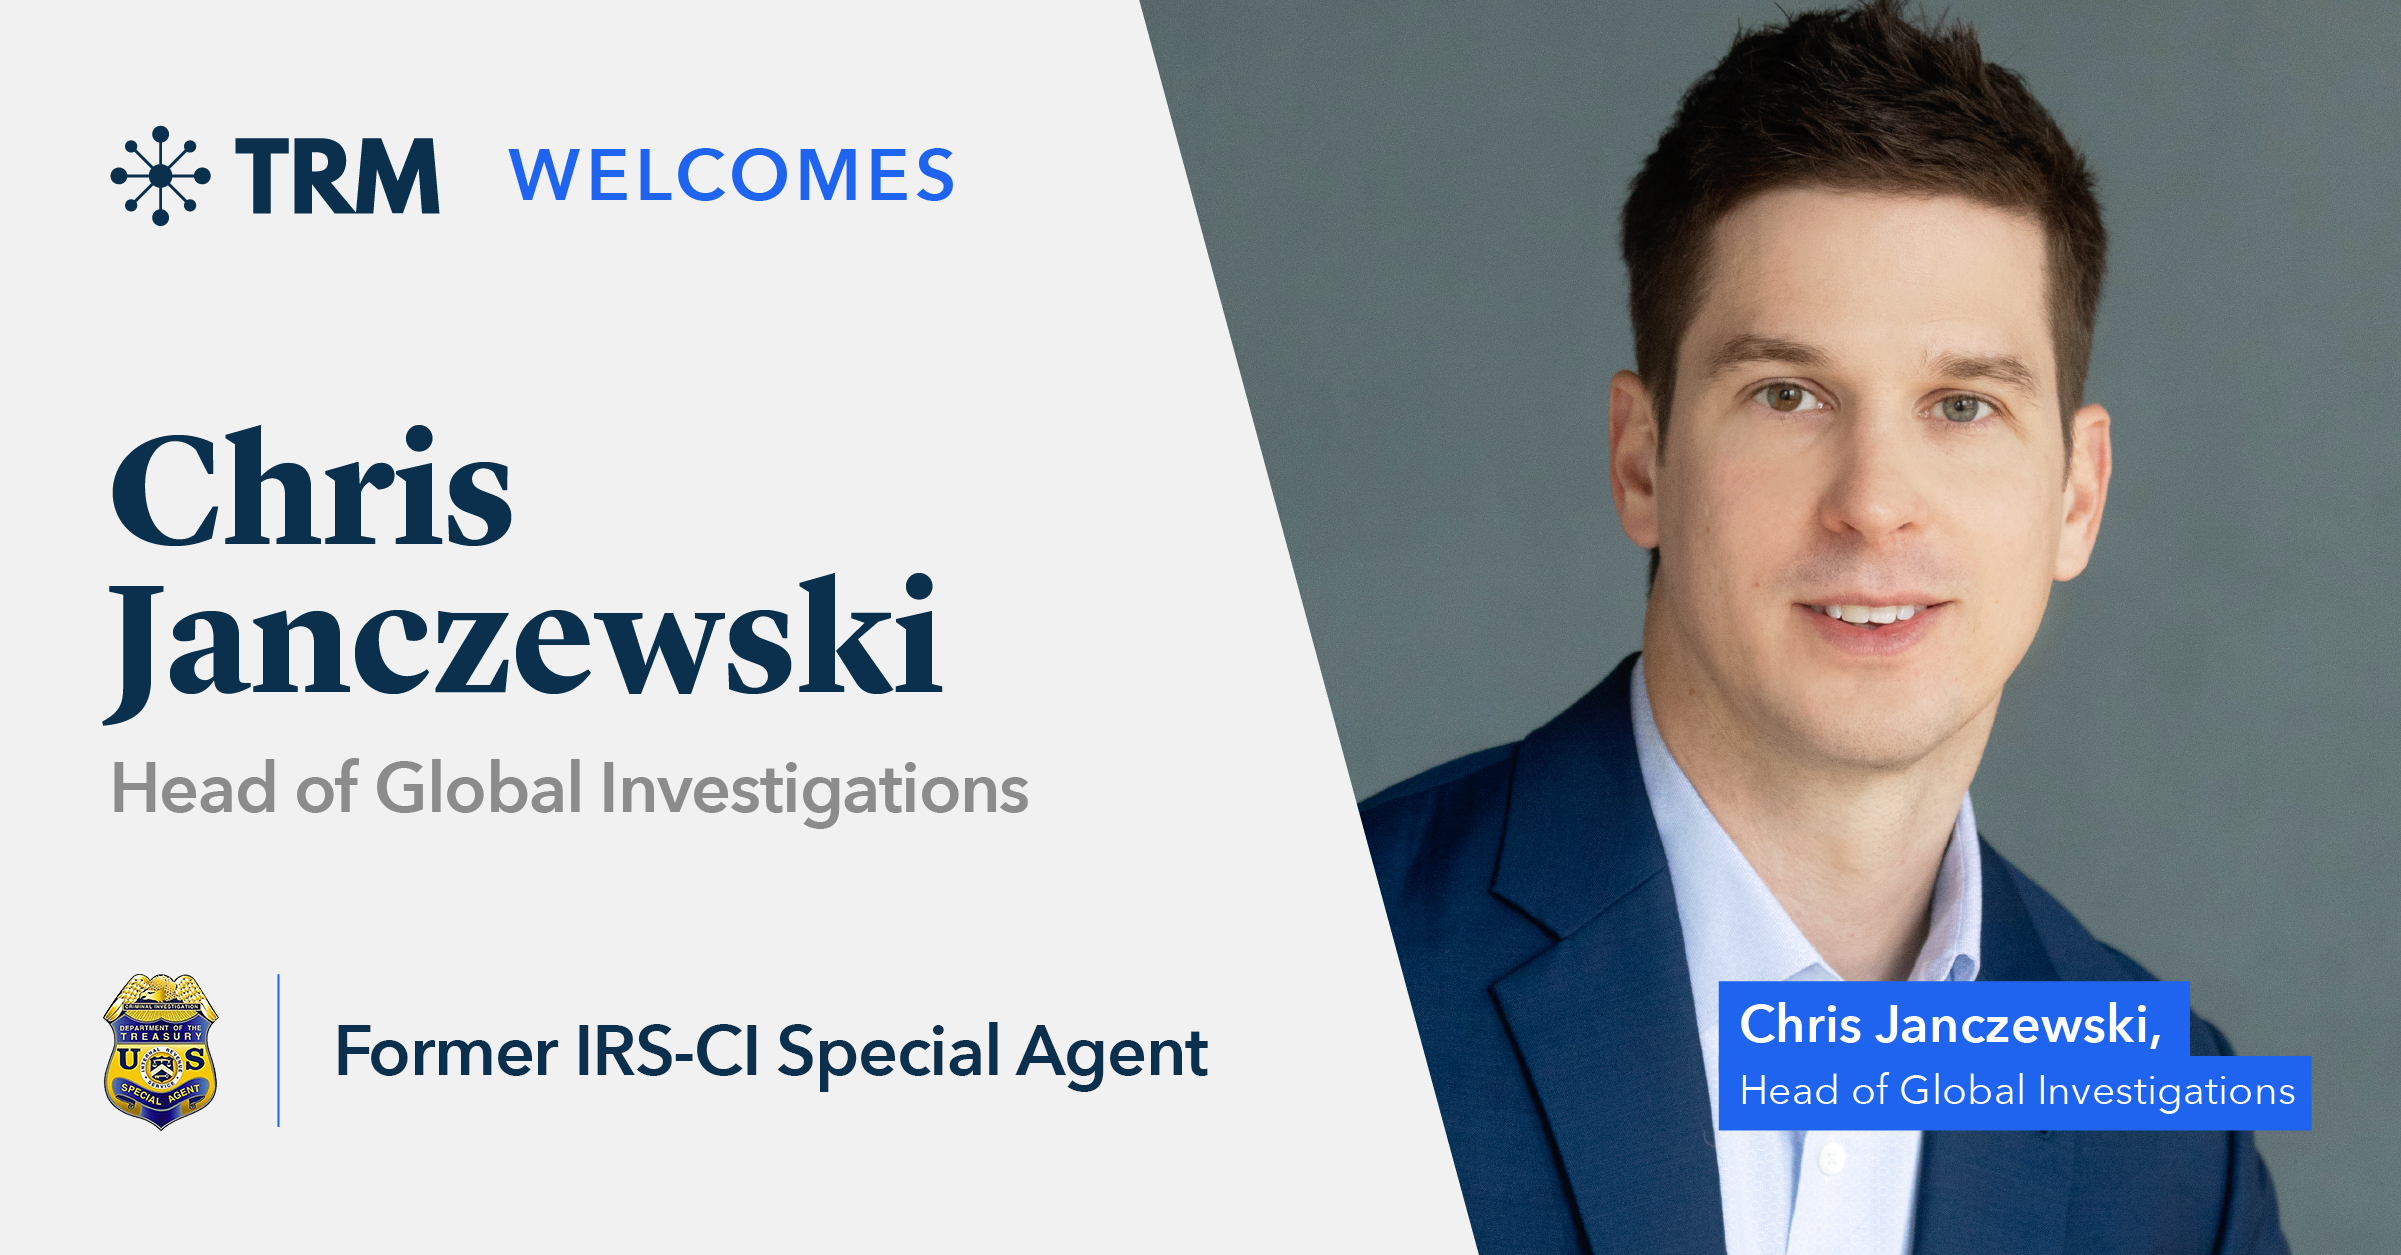 Chris Janczewski, Former IRS-CI Special Agent, Joins TRM to Lead Global Investigations Team